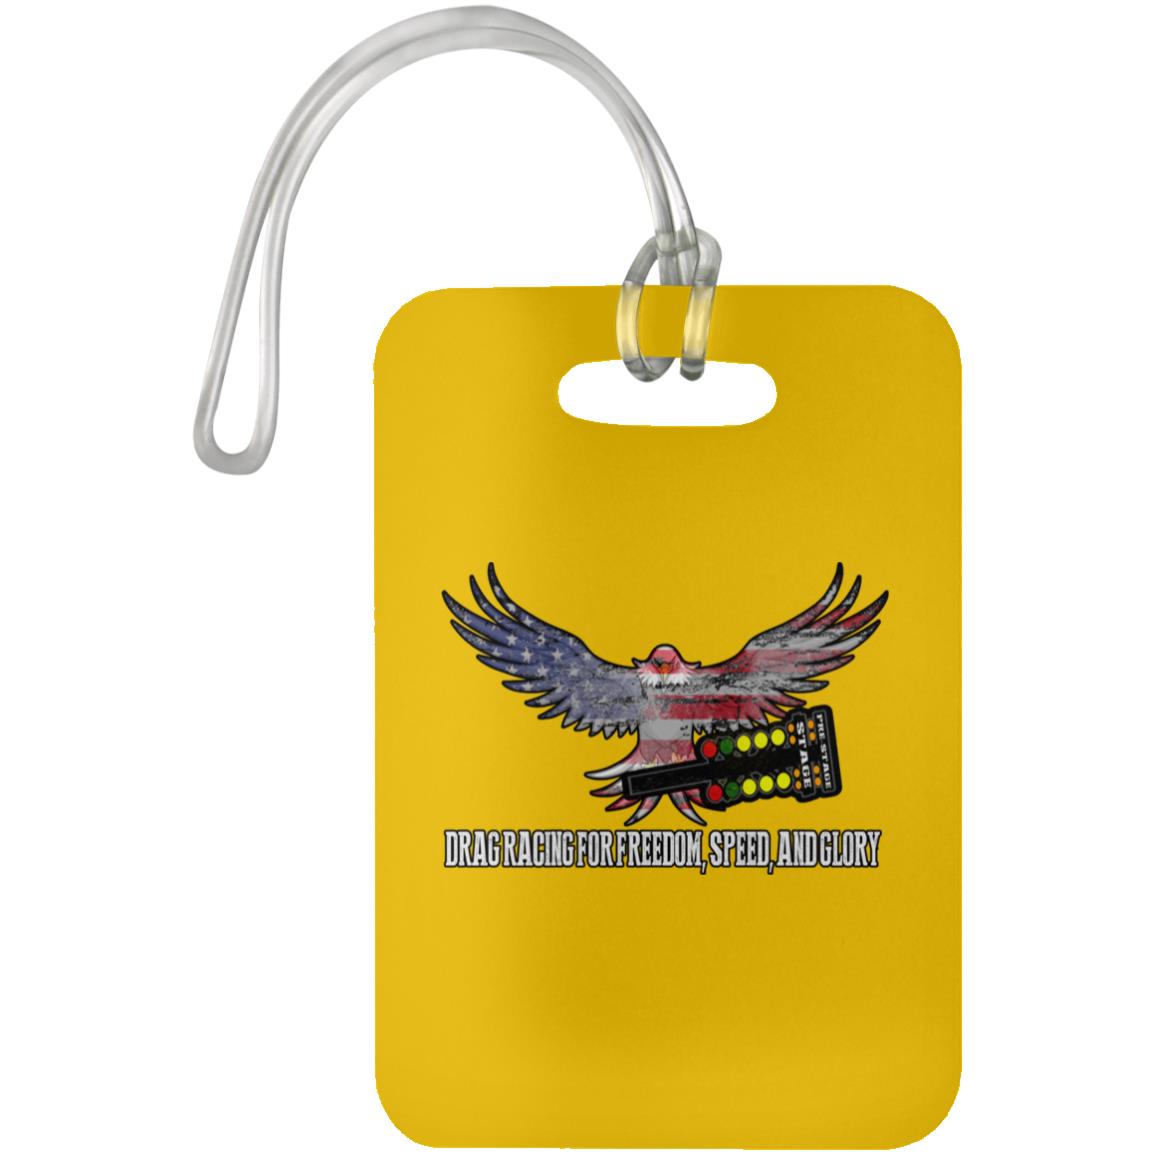 Drag Racing for Freedom, Speed, and Glory Luggage Bag Tag